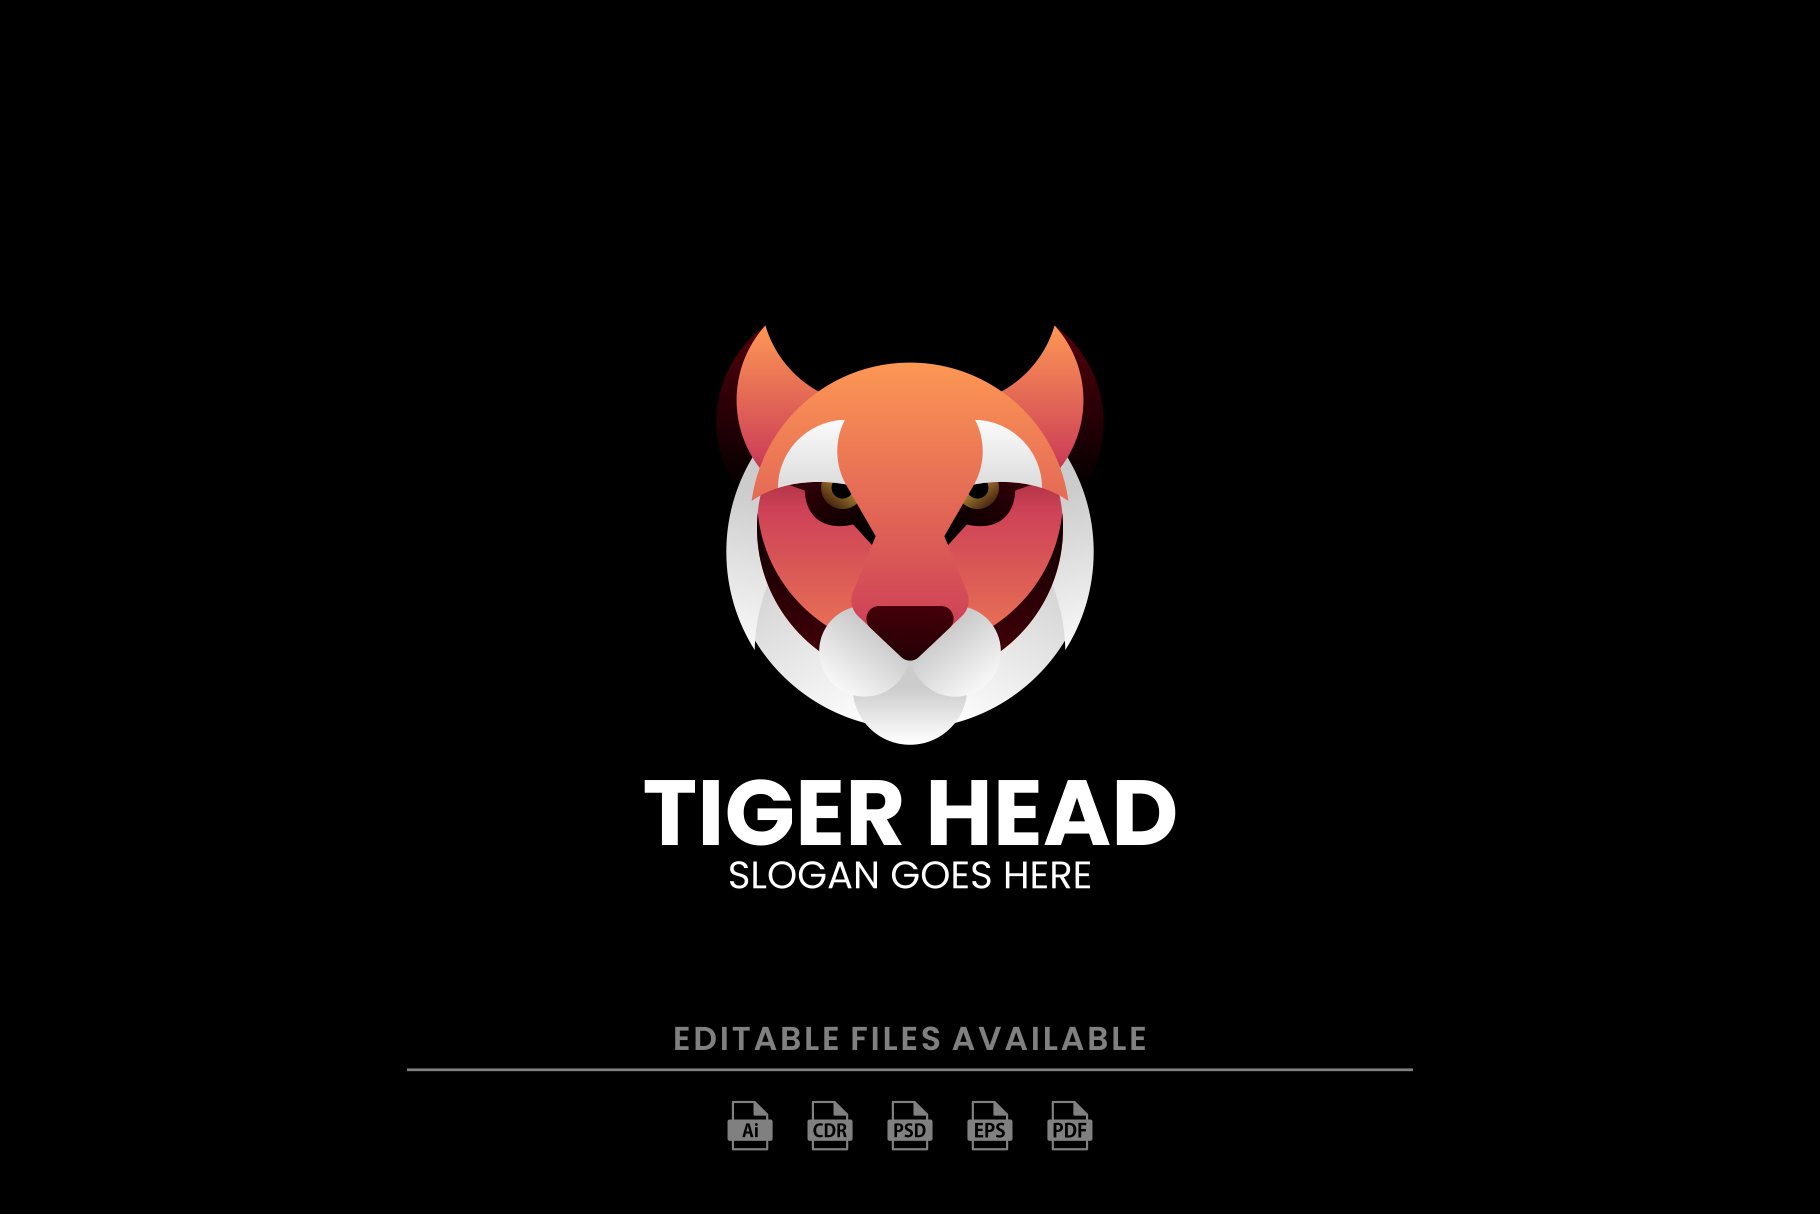 Tiger Head Colorful Logo cover image.